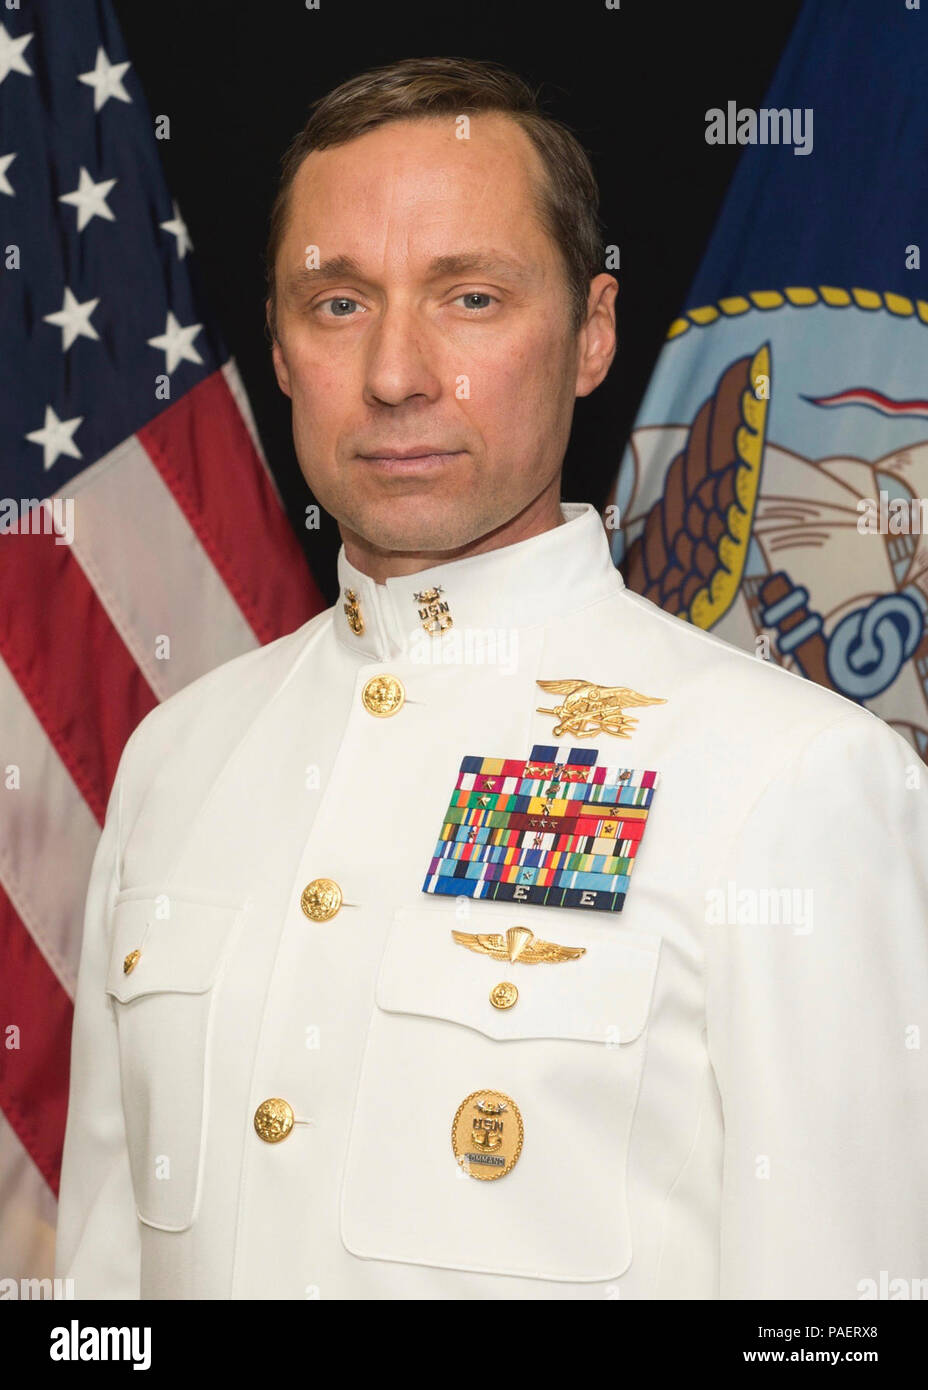 (May 7, 2018) An undated official portrait of retired Master Chief Special Warfare Operator (SEAL) Britt K. Slabinski. President Donald J. Trump will award the Medal of Honor to Master Chief Slabinski during a White House ceremony on May 24, 2018 for his heroic actions during the Battle of Takur Ghar in March 2002 while serving in Afghanistan.  Master Chief Slabinski is being recognized for his actions while leading a team under heavy effective enemy fire in an attempt to rescue SEAL teammate Petty Officer 1st Class Neil Roberts during Operation Anaconda in 2002. The Medal of Honor is an upgra Stock Photo